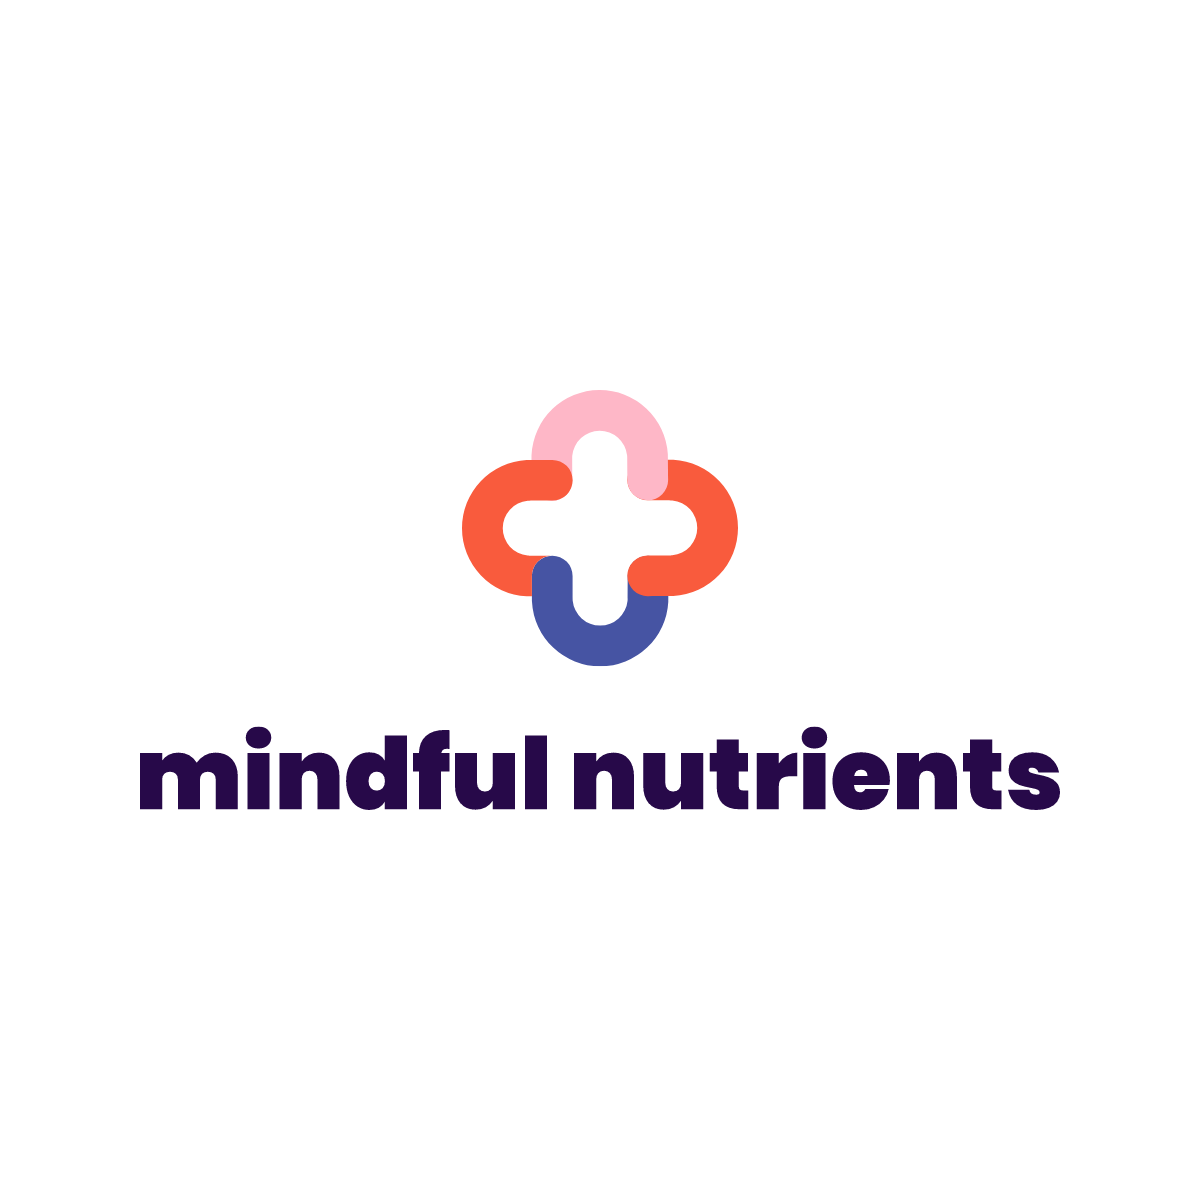 mindful nutrients